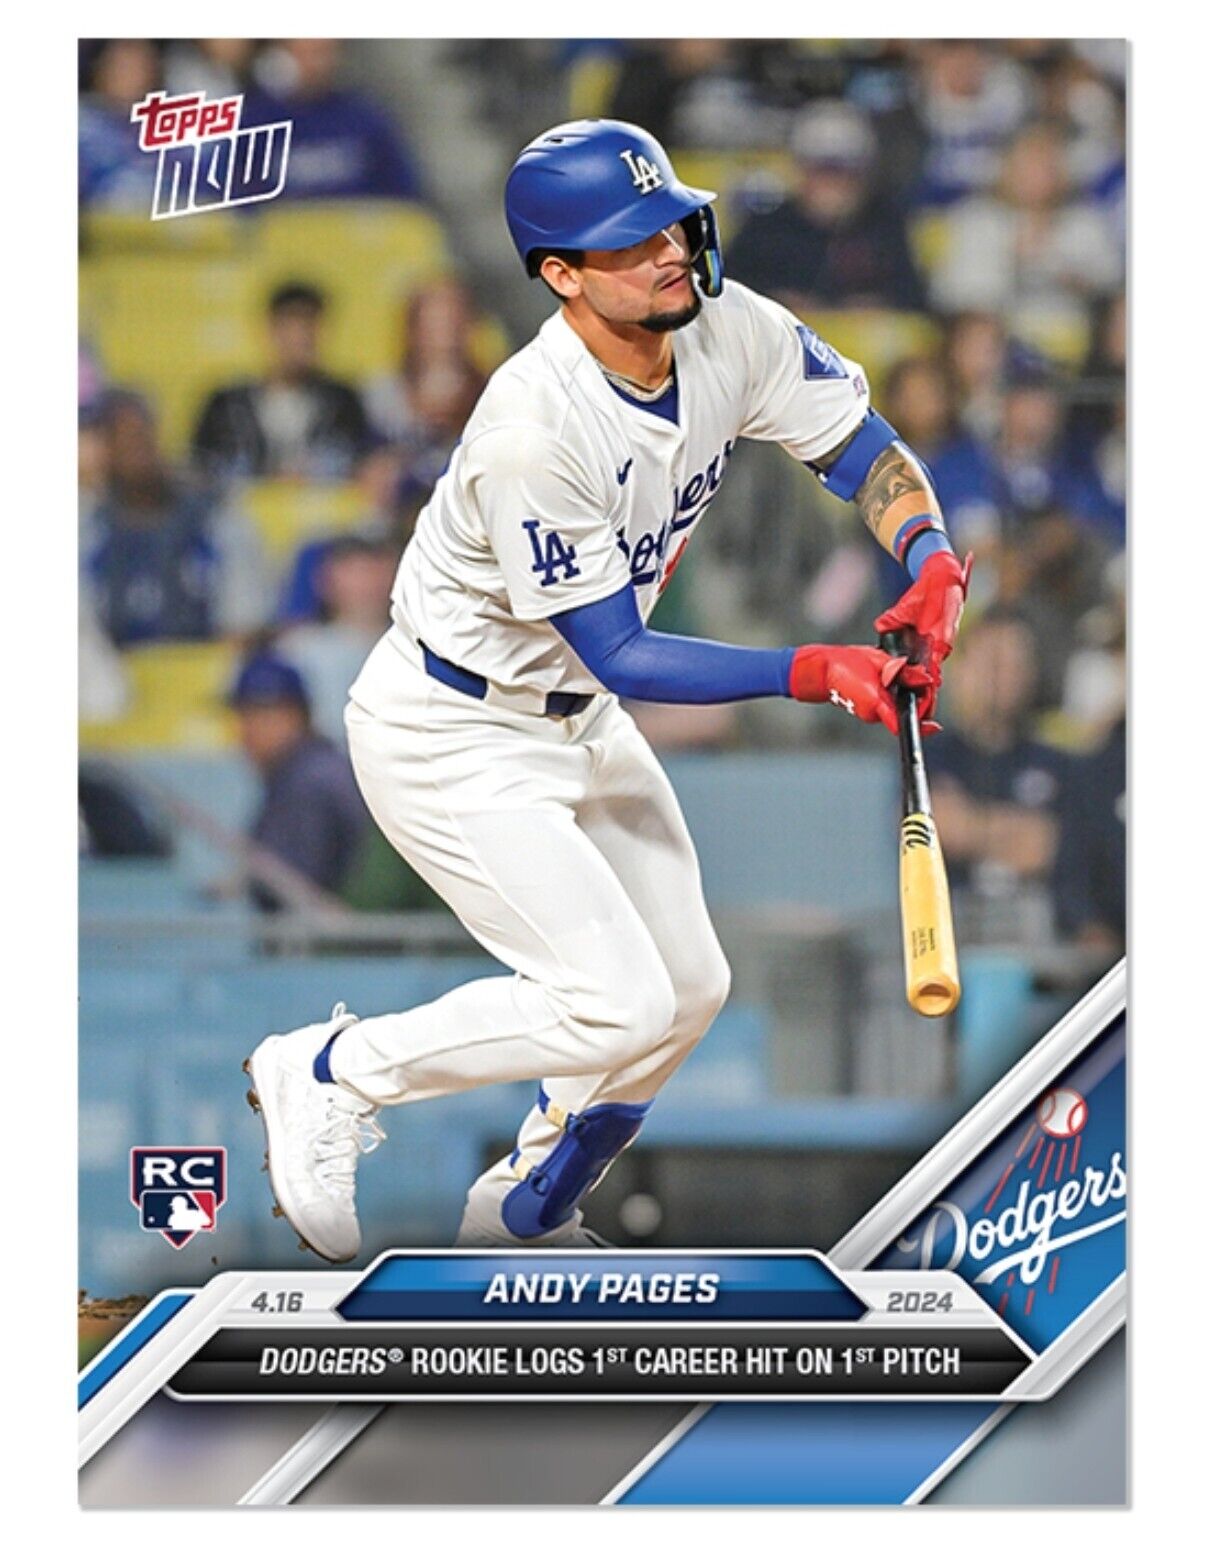 *PRE SALE* Andy Pages - 2024 MLB TOPPS NOW® Card 87